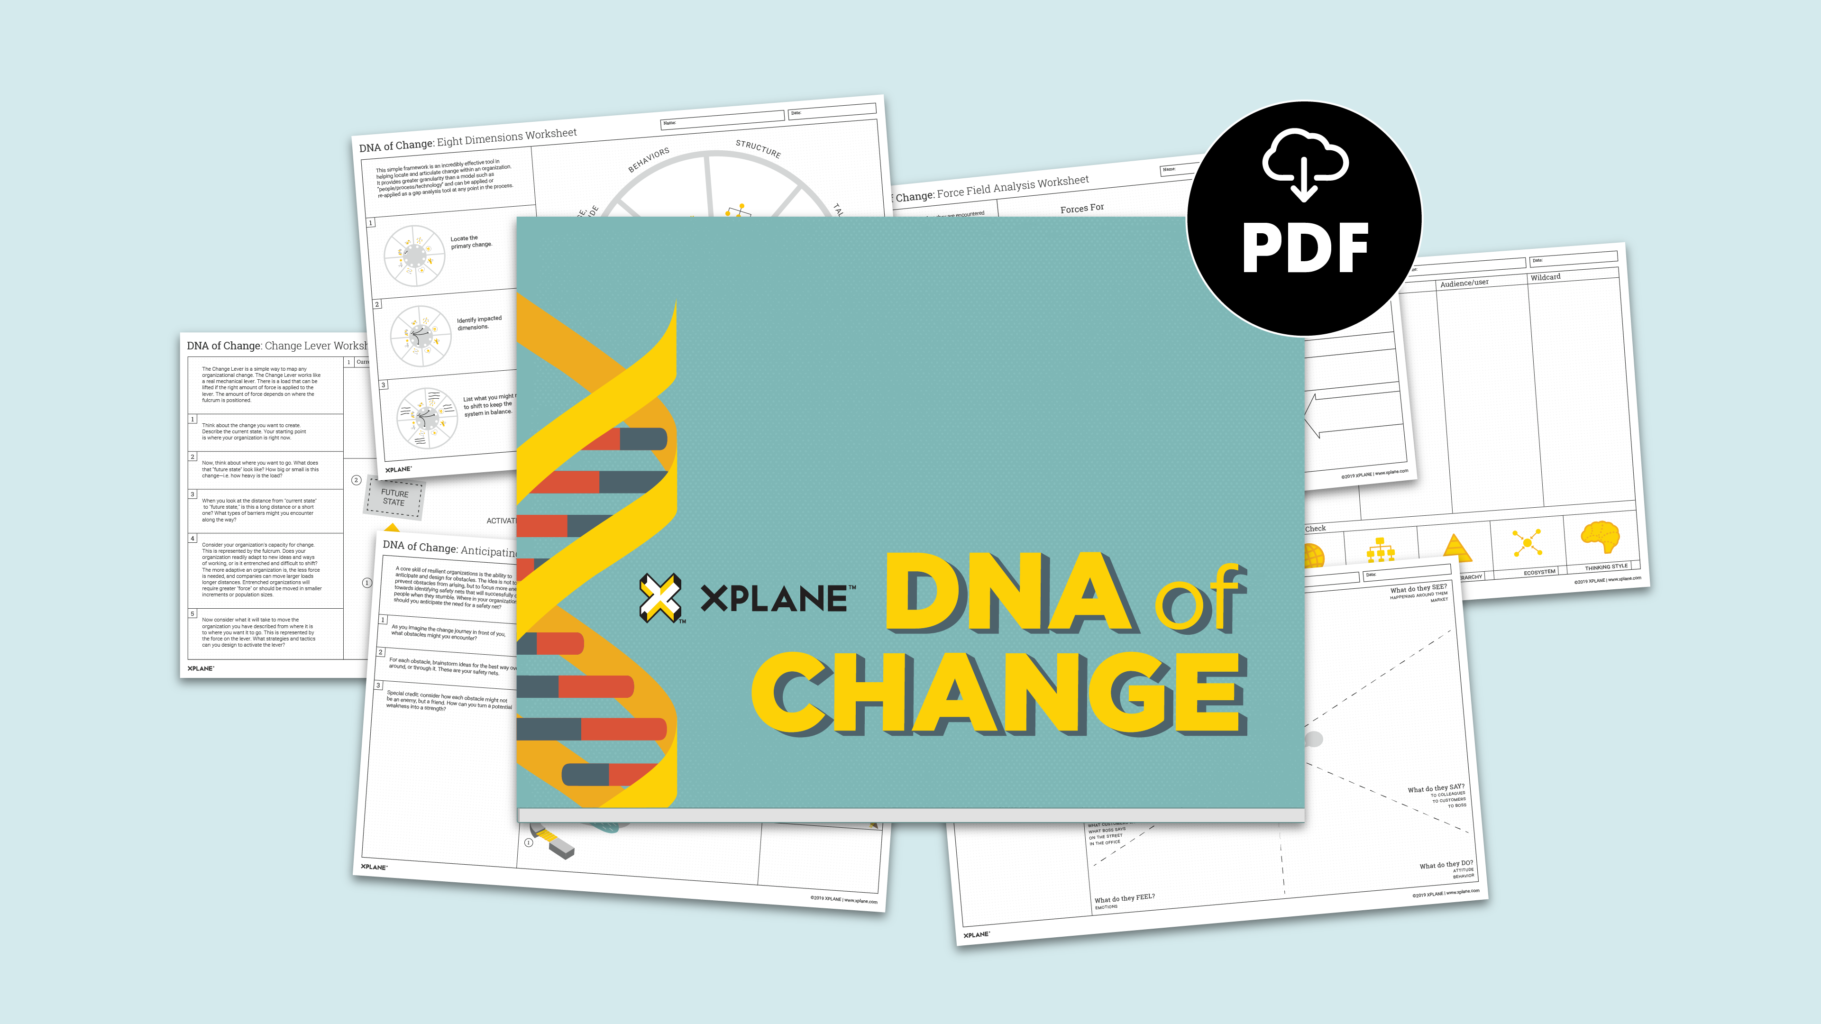 DNA of Change book sitting on top of several worksheets included in the book. A black circle with "PDF" at the center shows this is a downloadable eBook. Against a light blue background.